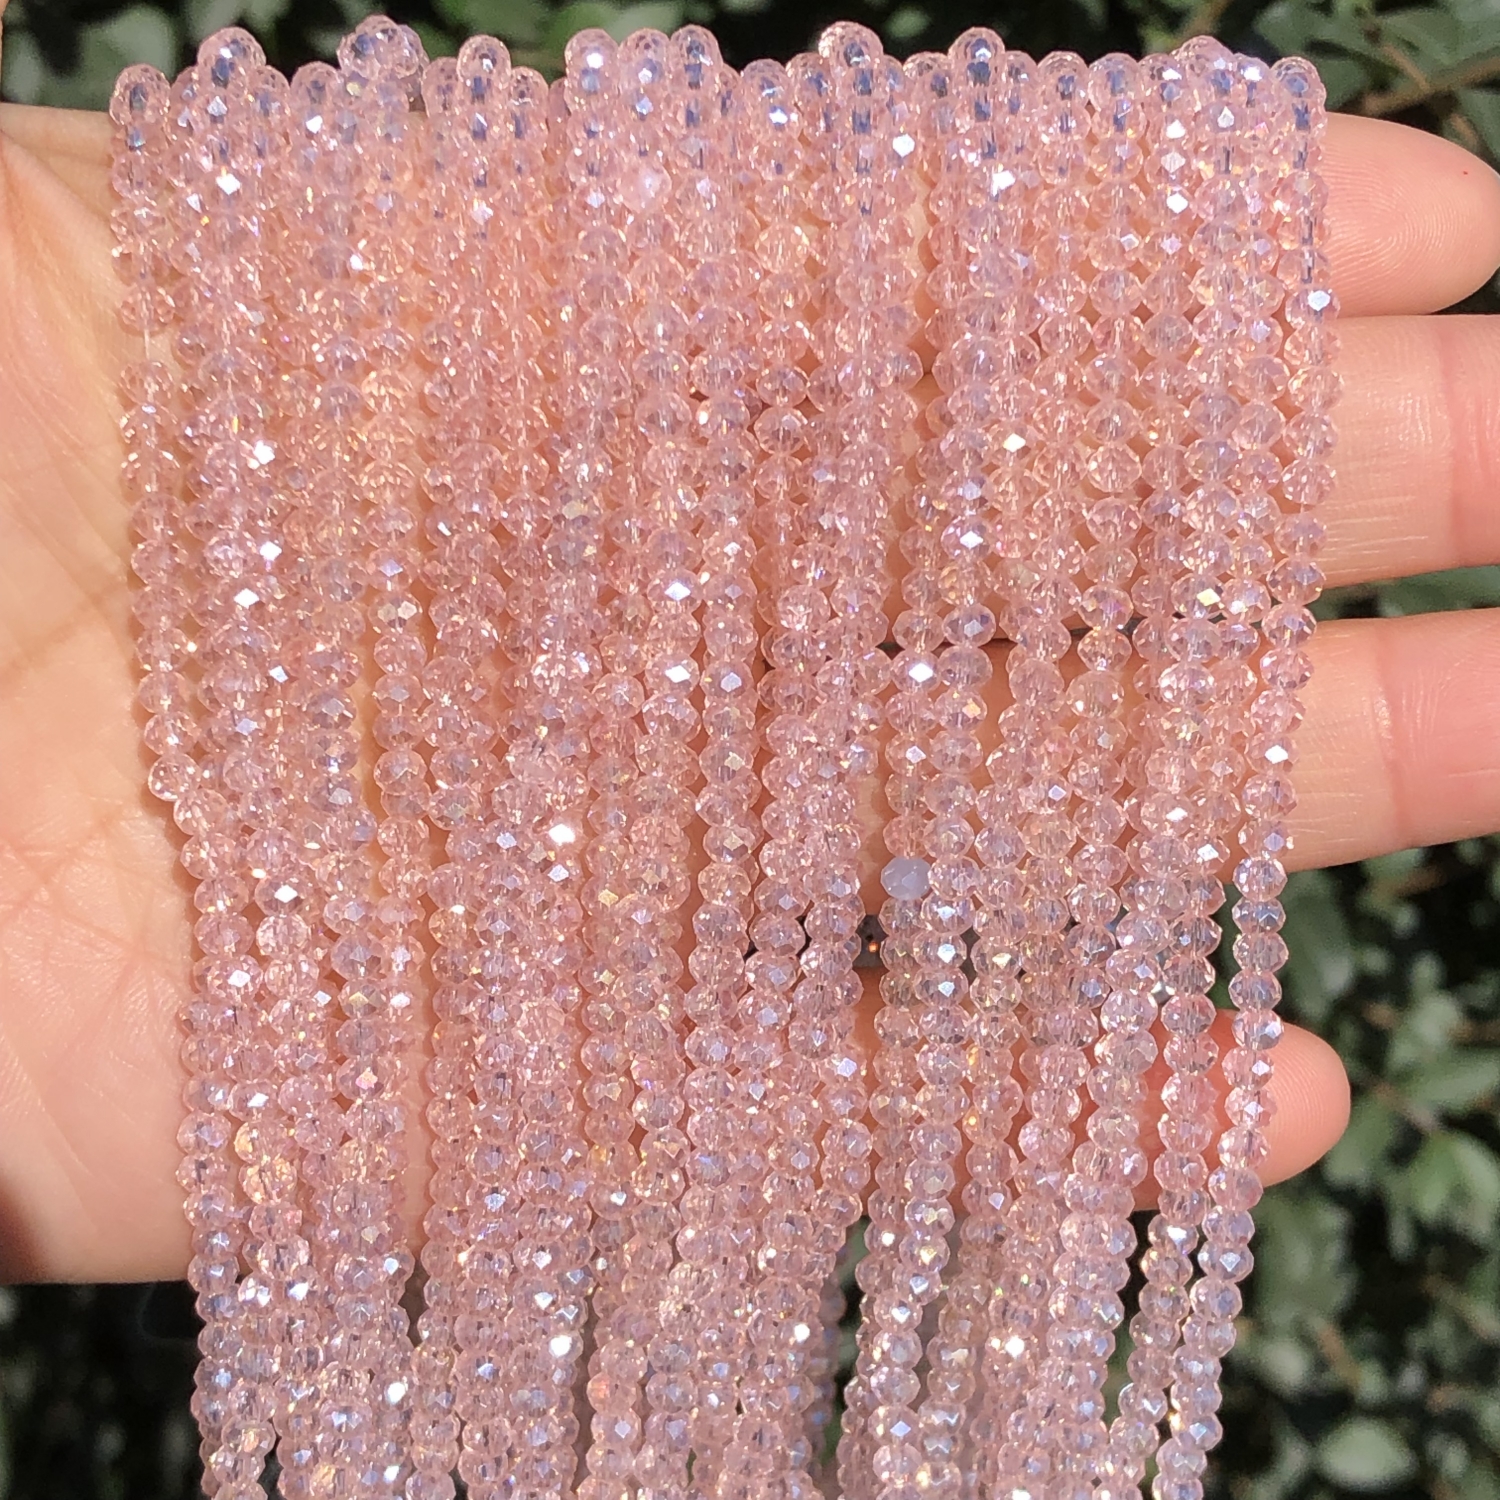 ECYC Ltd 50 Pcs 6mm Faceted Round Crystal Beads Faceted Rondelle Crystal  Glass Beads AB Color Crystal Loose Spacer Beads Gemstone Glass Beads Craft